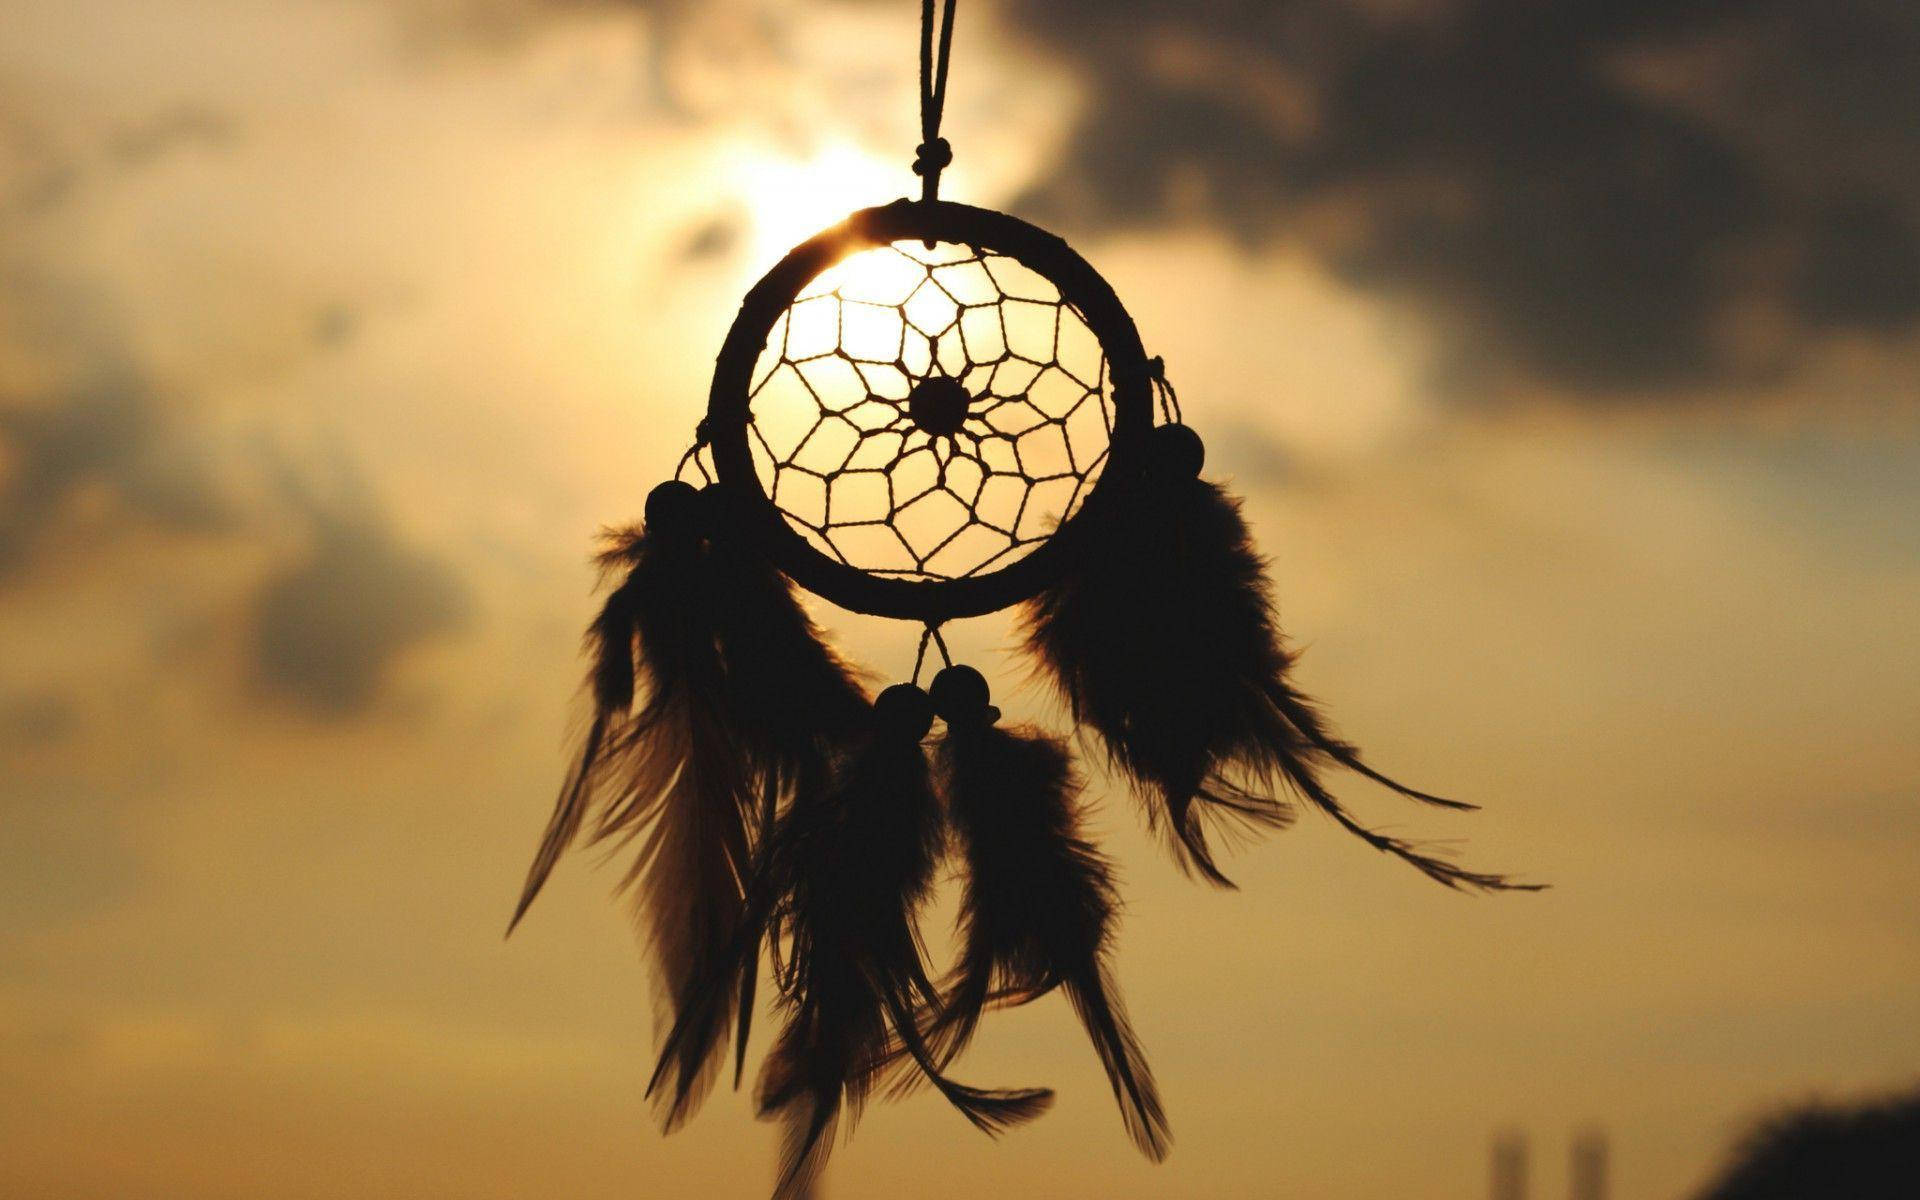 Dream Catcher With Cloudy Sky Background